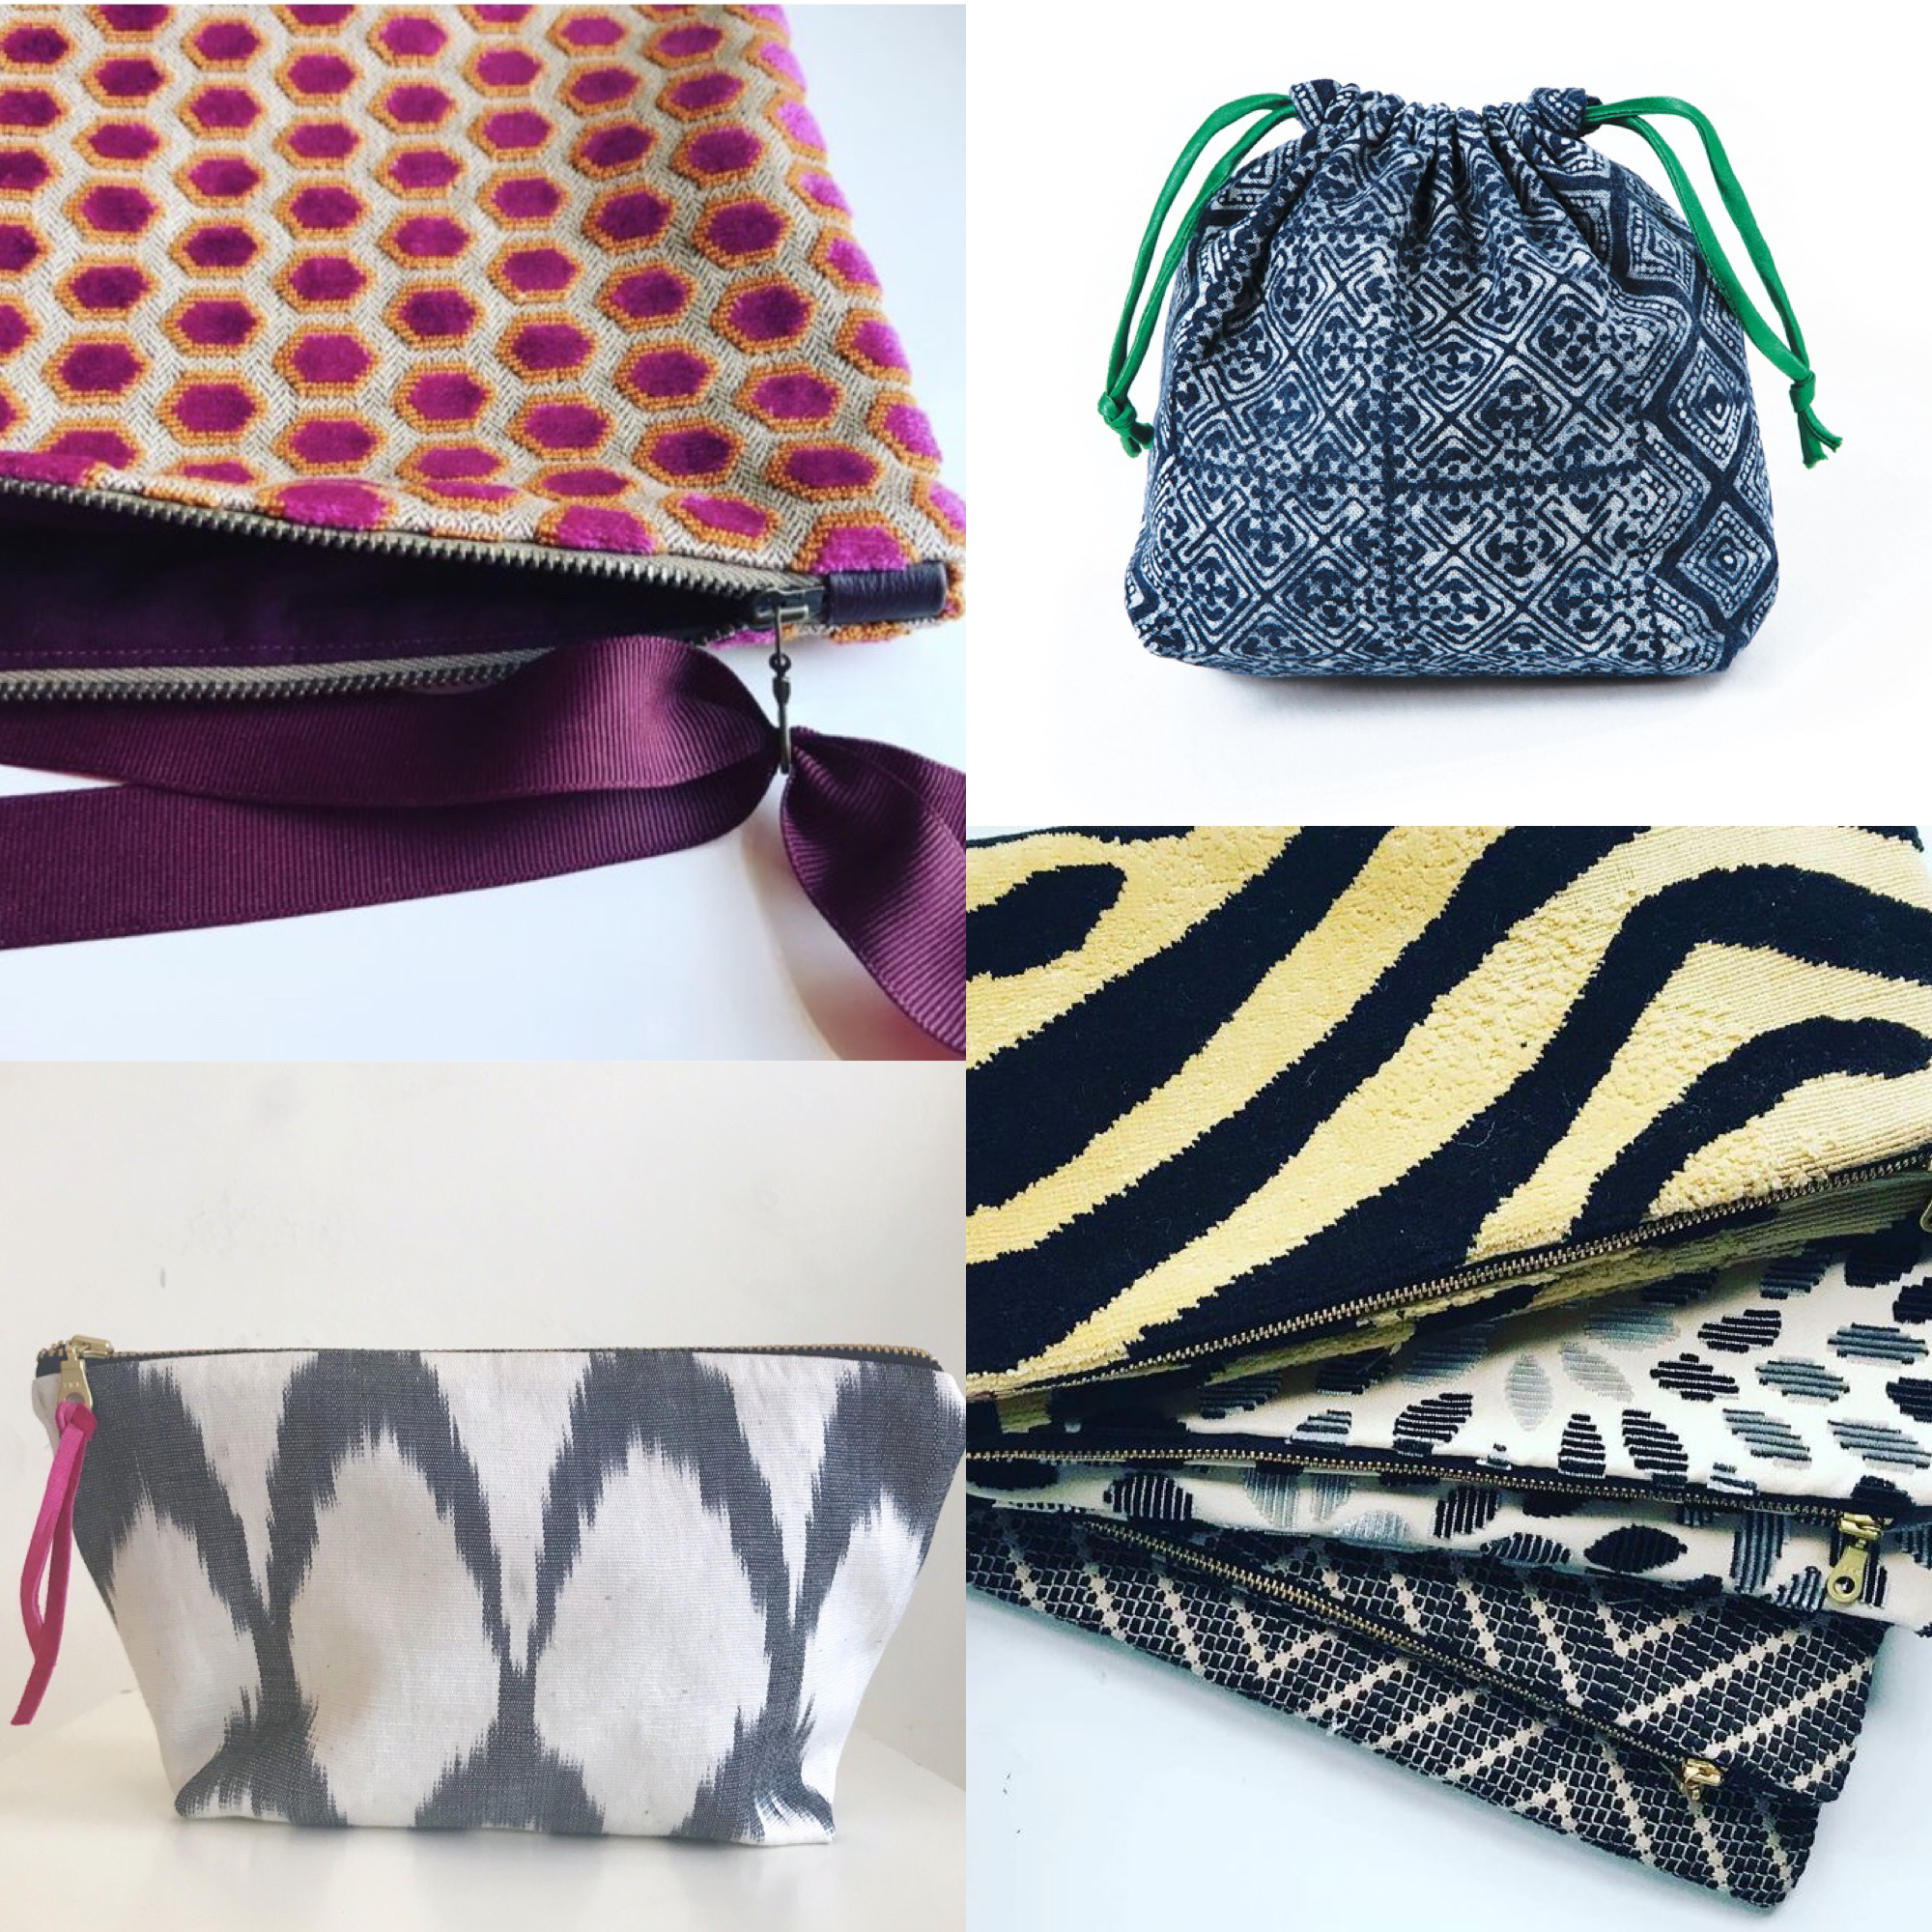 5 Best Fabrics for Sewing Bags and Purses, Sew Bags: The Practical Guide to  making purses, totes — Blog